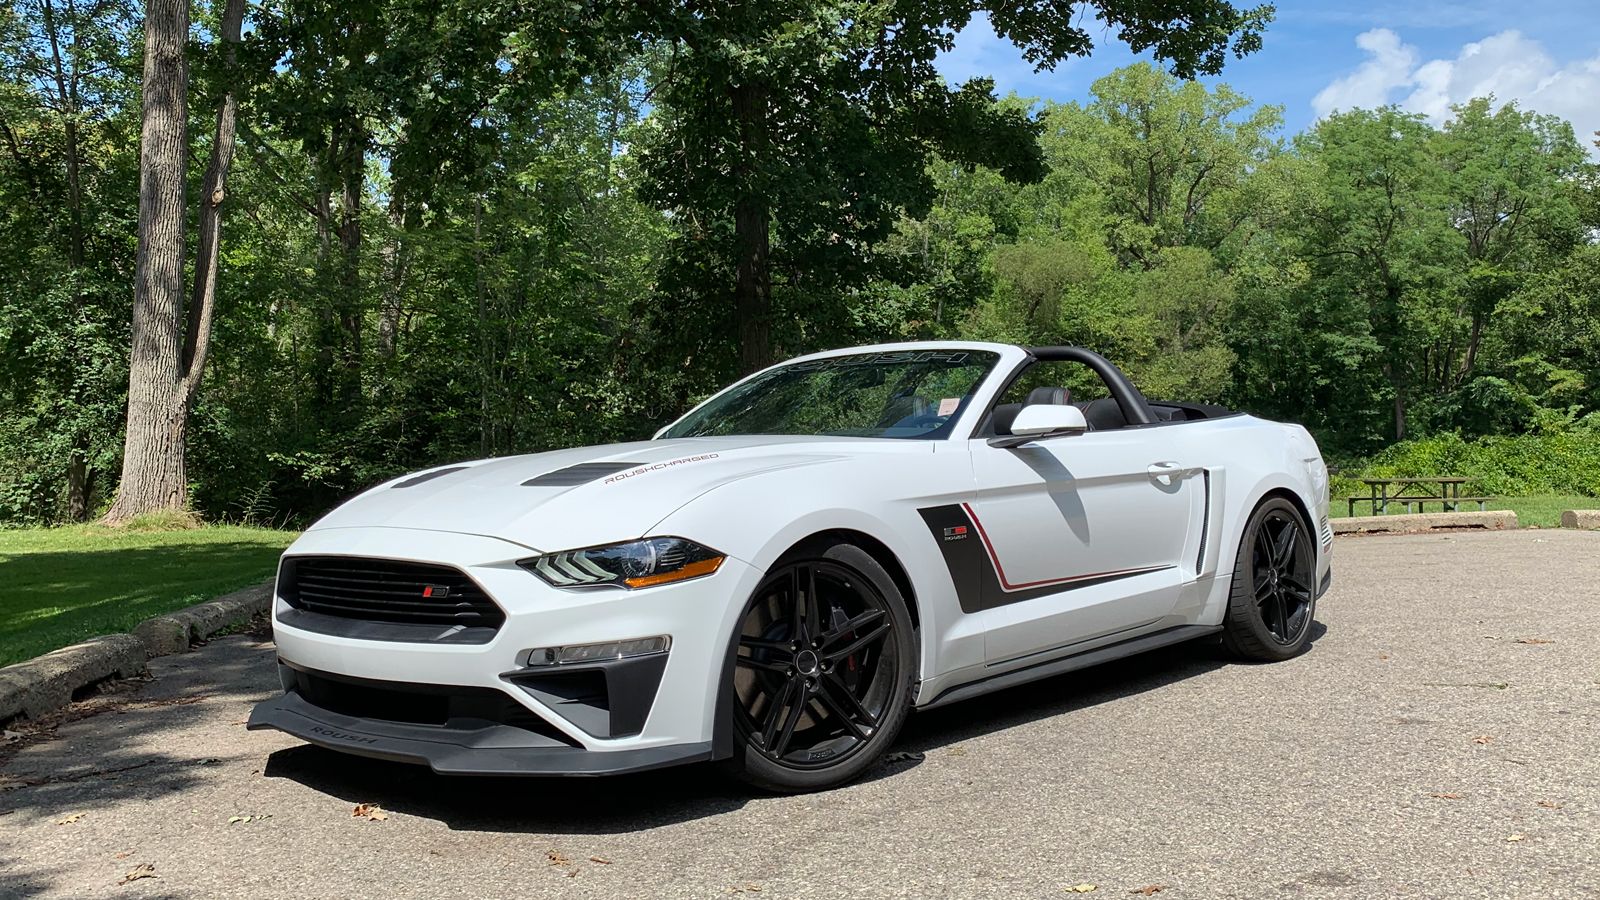 2019 roush mustang stage 3 road test everything you need to know 2019 roush mustang stage 3 road test